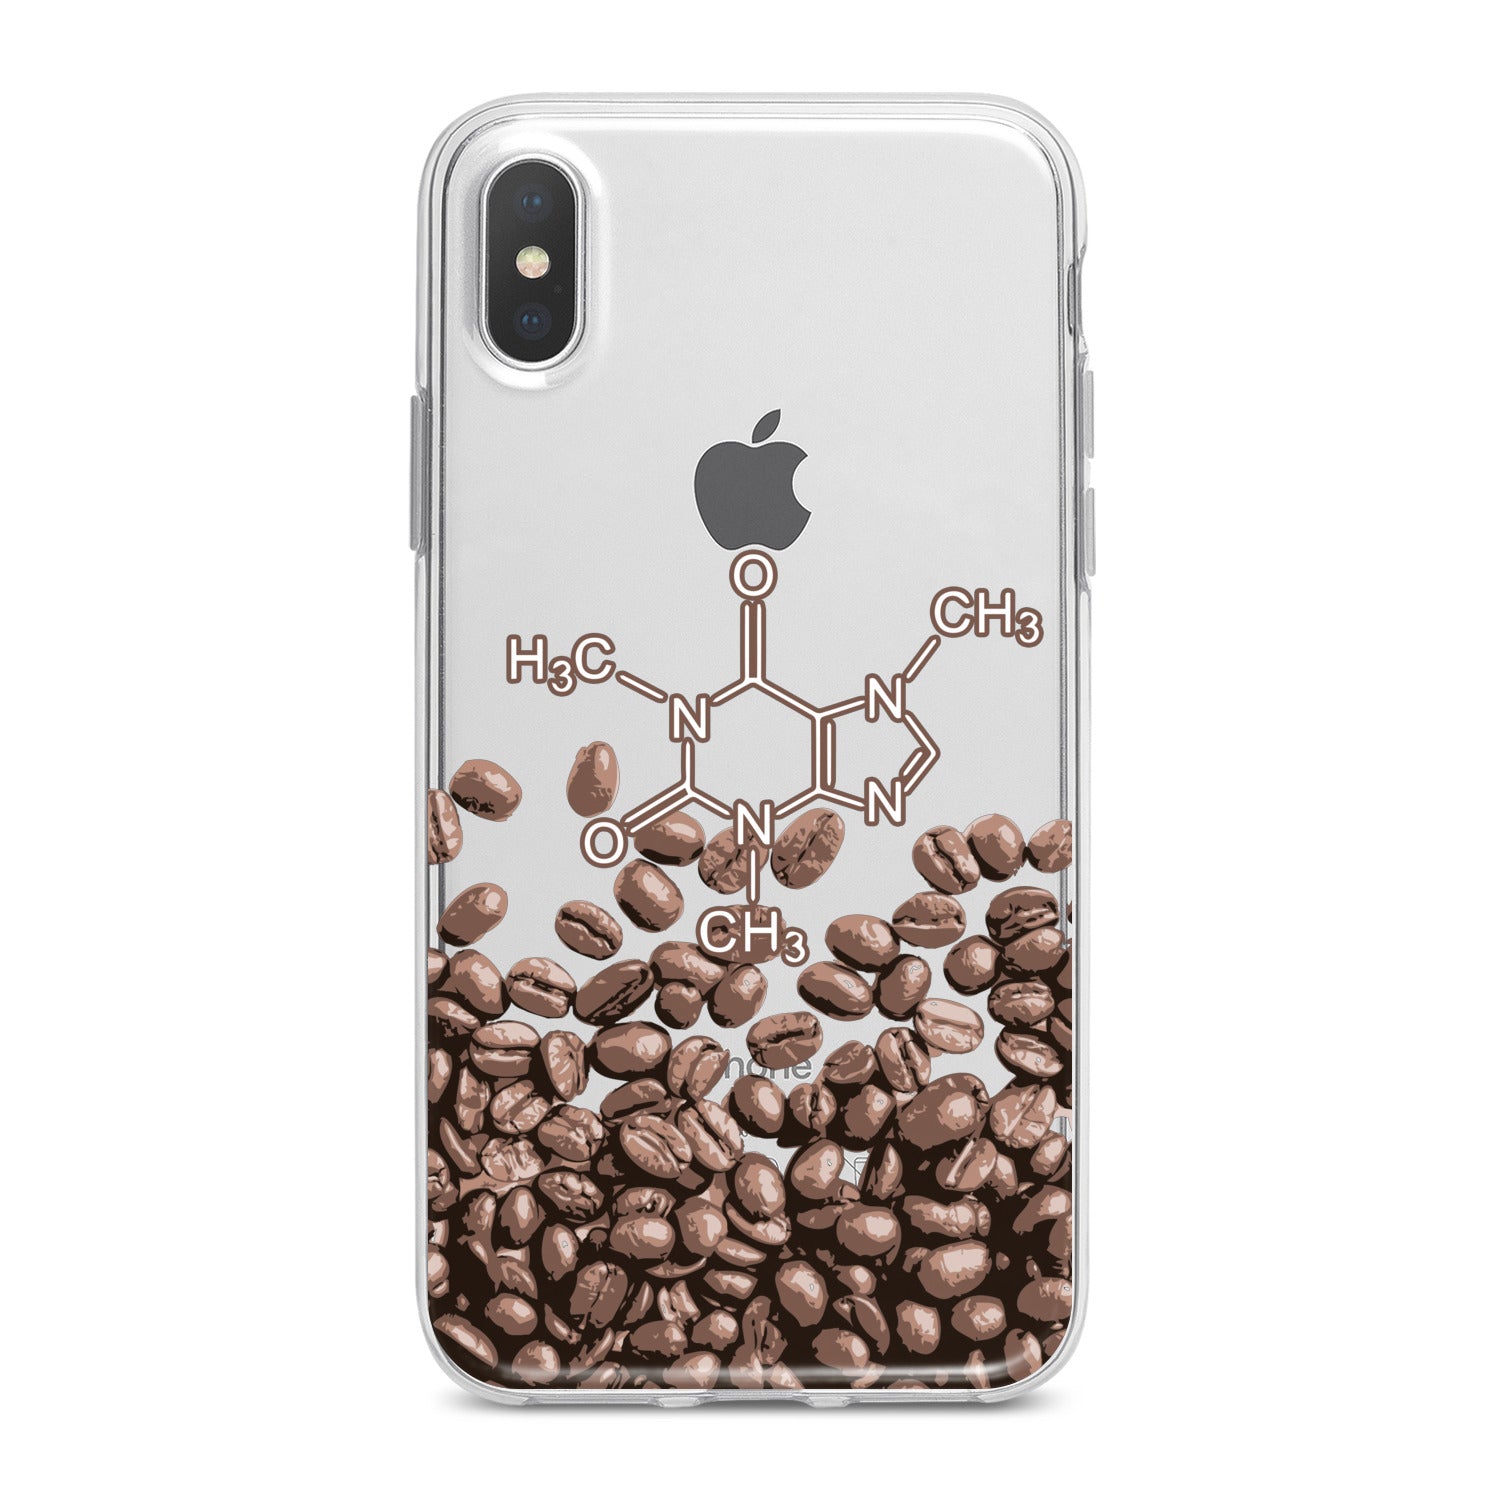 Lex Altern Coffee Formula Phone Case for your iPhone & Android phone.